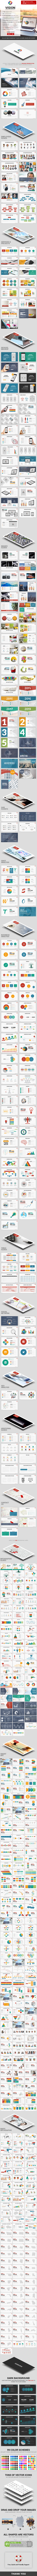 Vision - Business PowerPoint Presentation Template